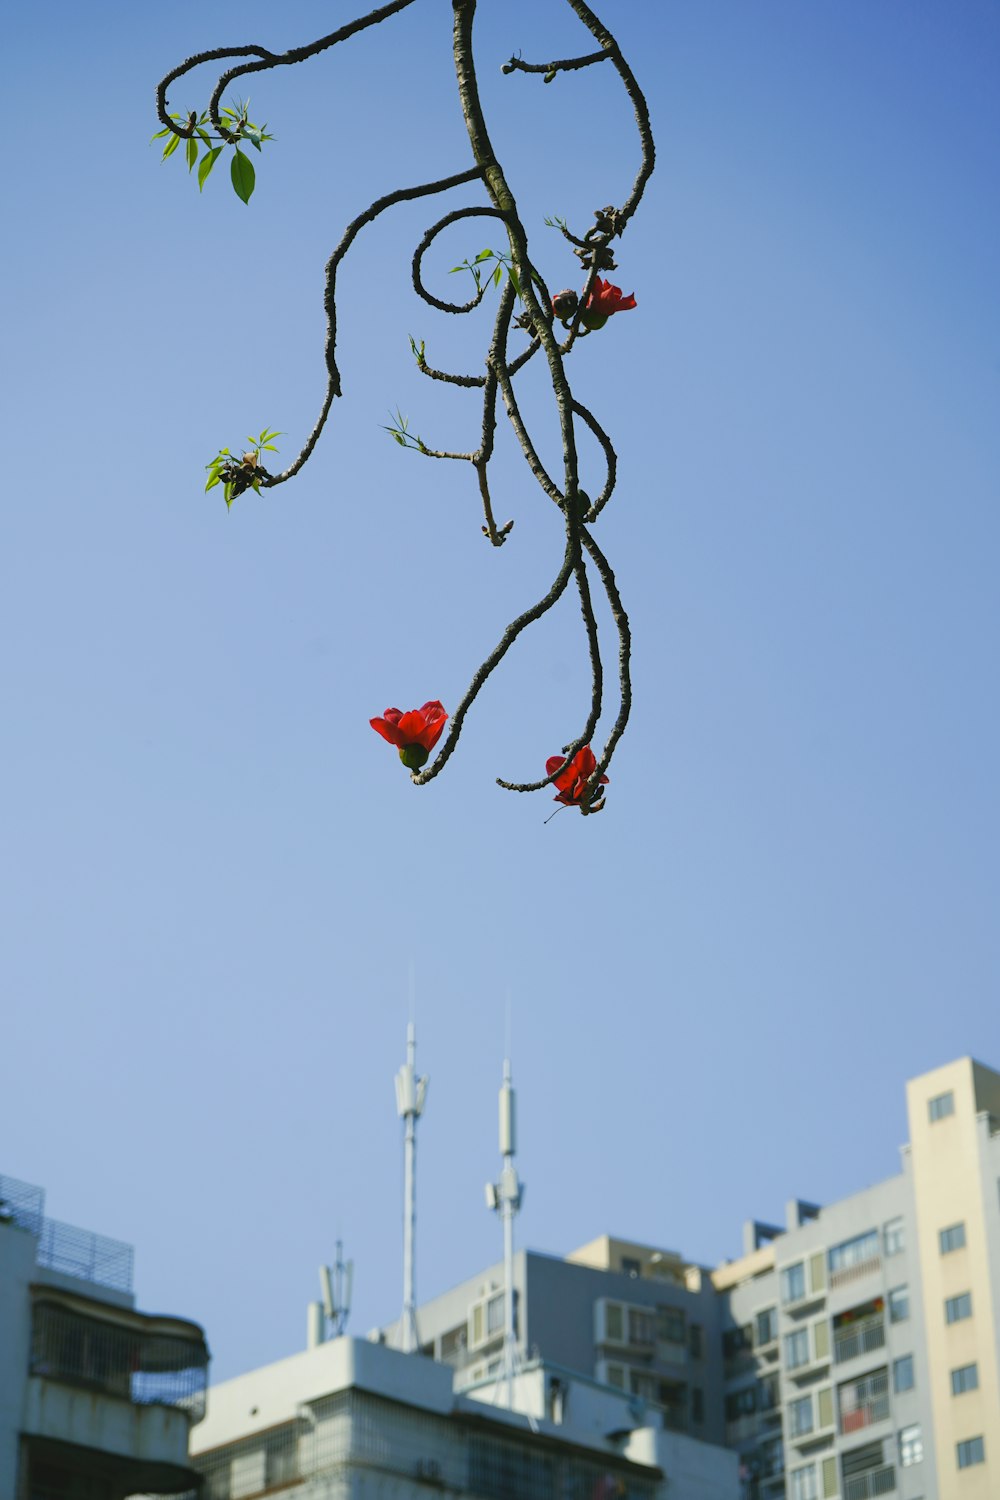 a tree branch with two red birds perched on it